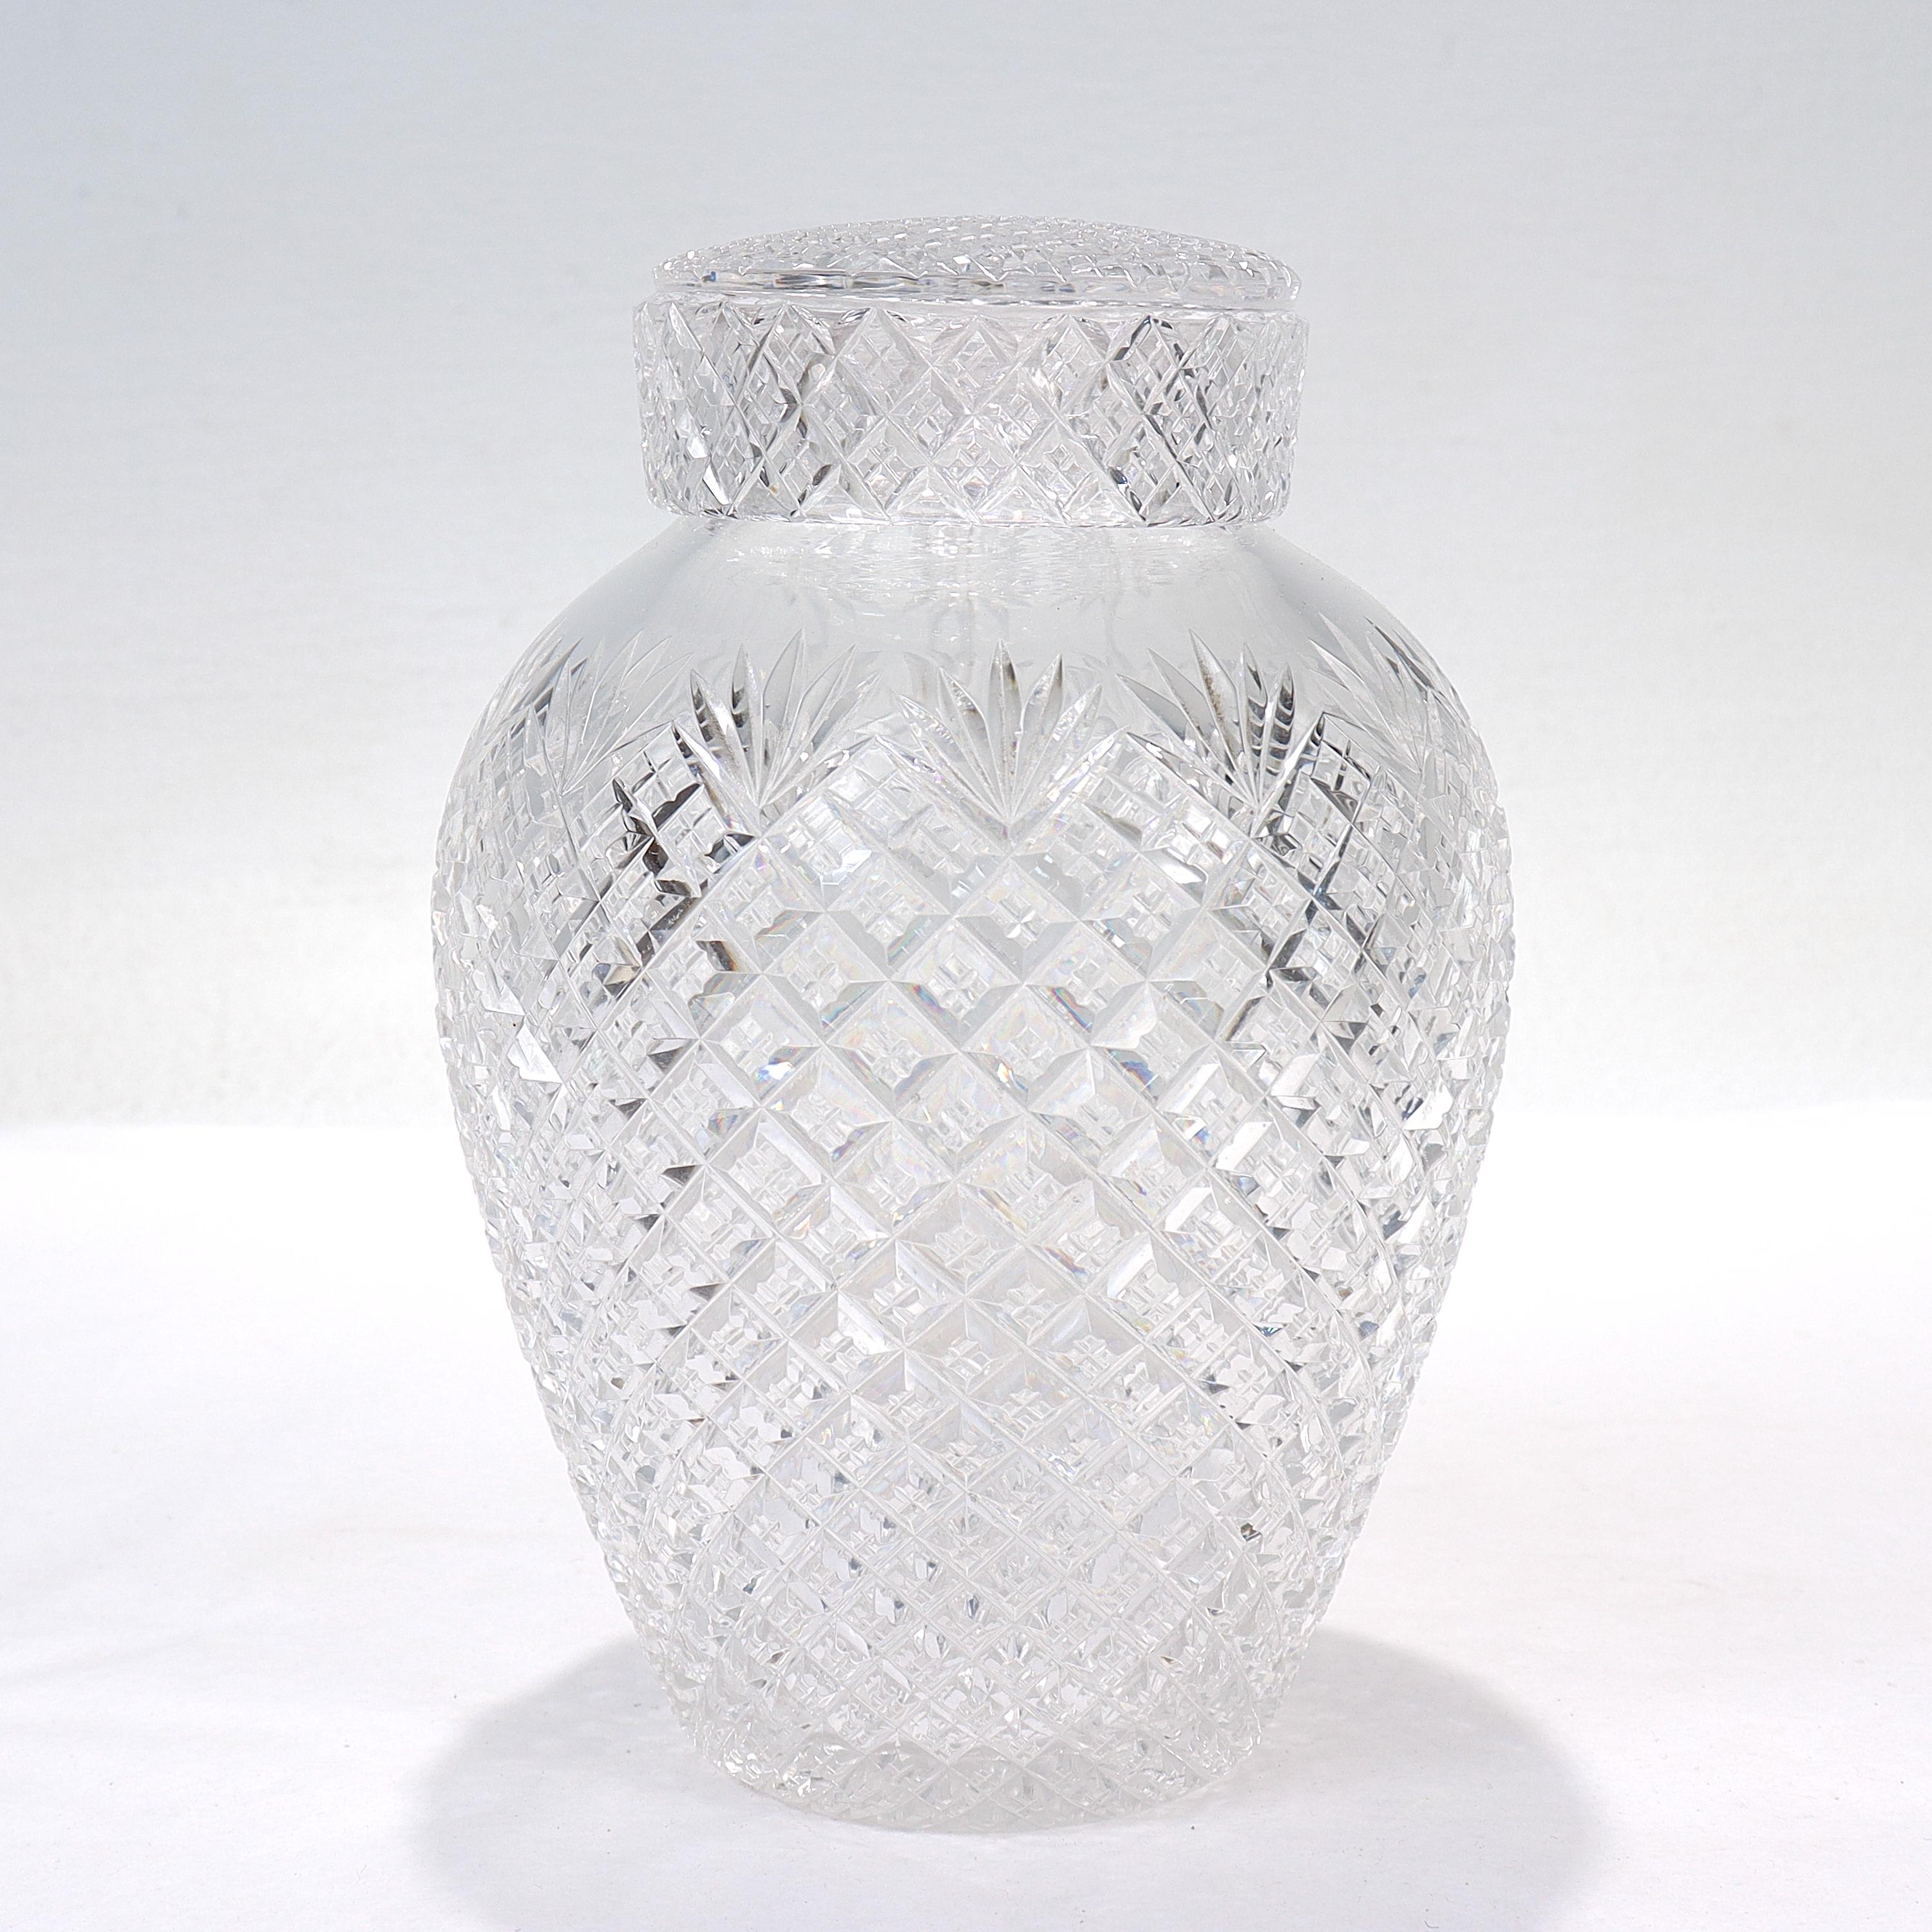 A fine antique ABP cut glass tea caddy.

In the Strawberry Diamond & Fan pattern.

Comprising a cut glass body, conforming internal cover, and cut glass lid. 

The lid and body each with overall cut decoration throughout.

The base has a